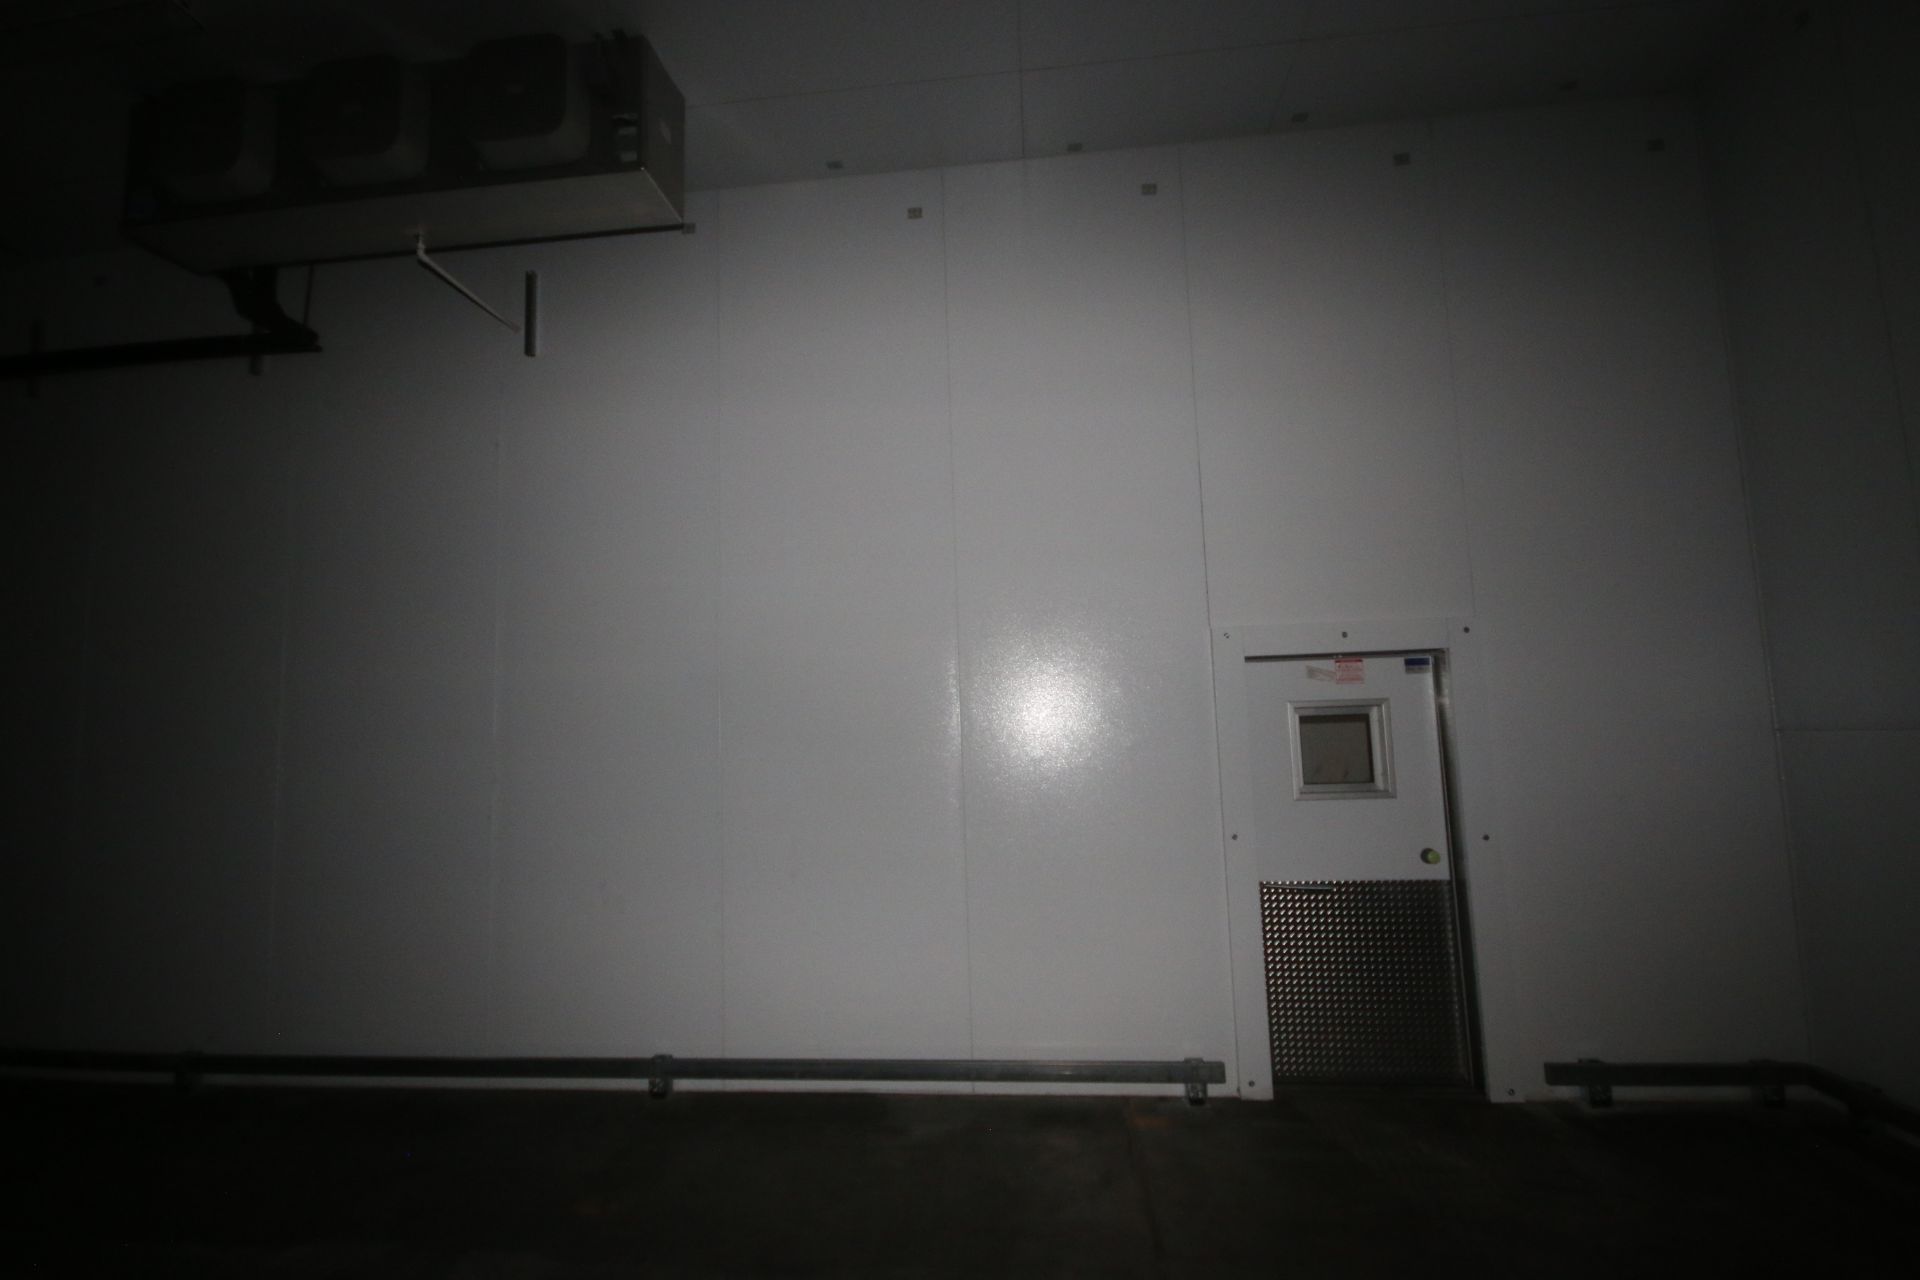 2018 RollSeal Air Tight Drive-Thru Modular Room, Overall Dims.: Aprox. 88' L x 20' W x 190" Tall, - Image 11 of 24